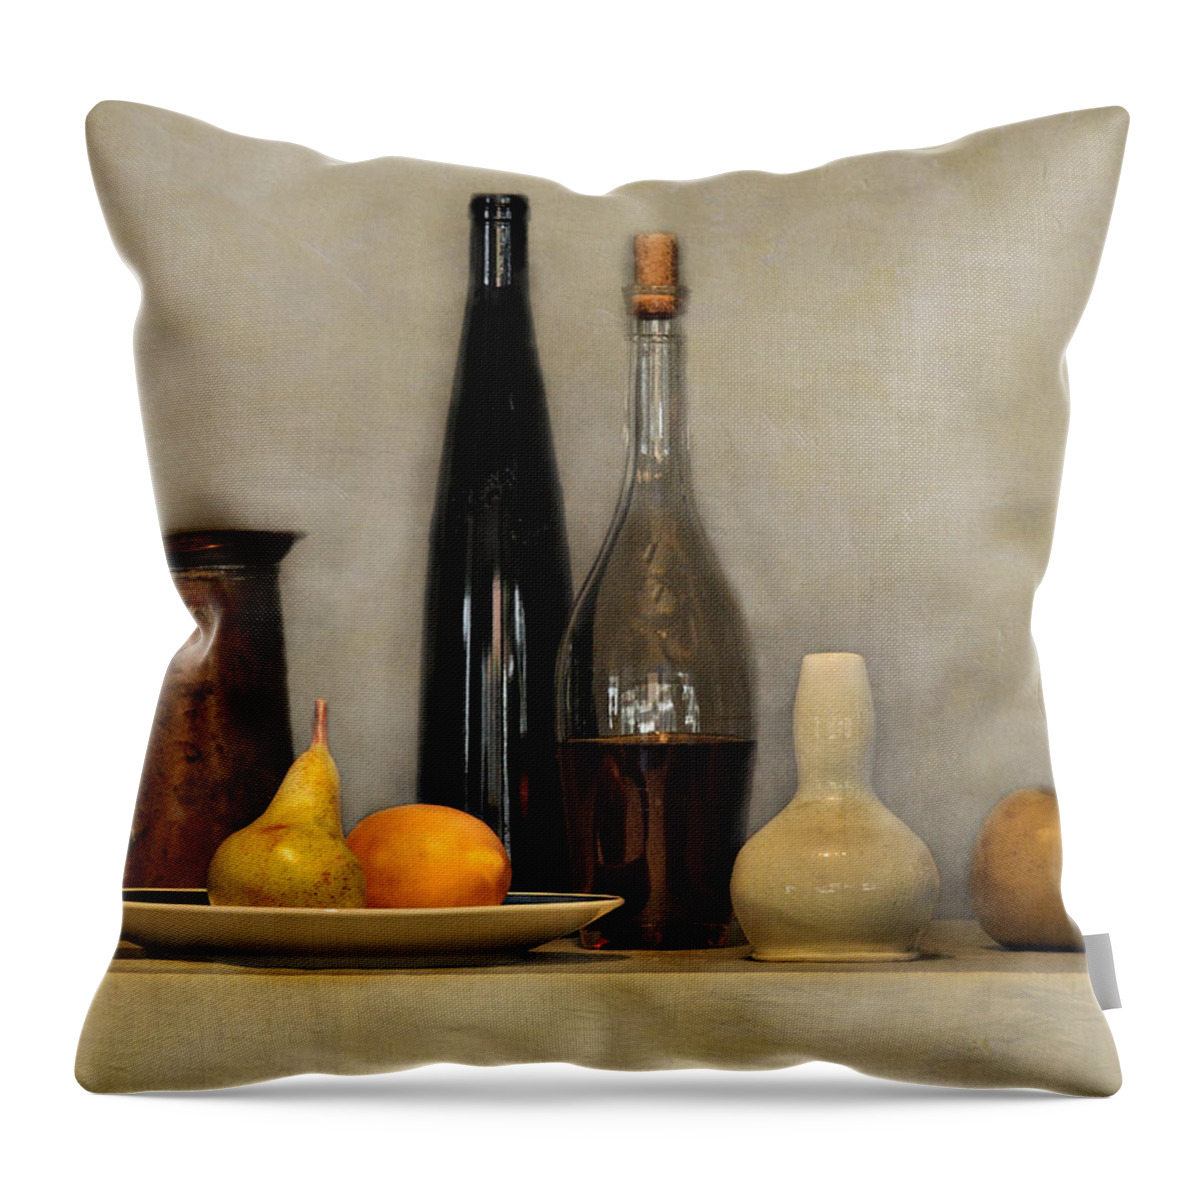 Pitcher Throw Pillow featuring the photograph Still Life Study by Carol Eade